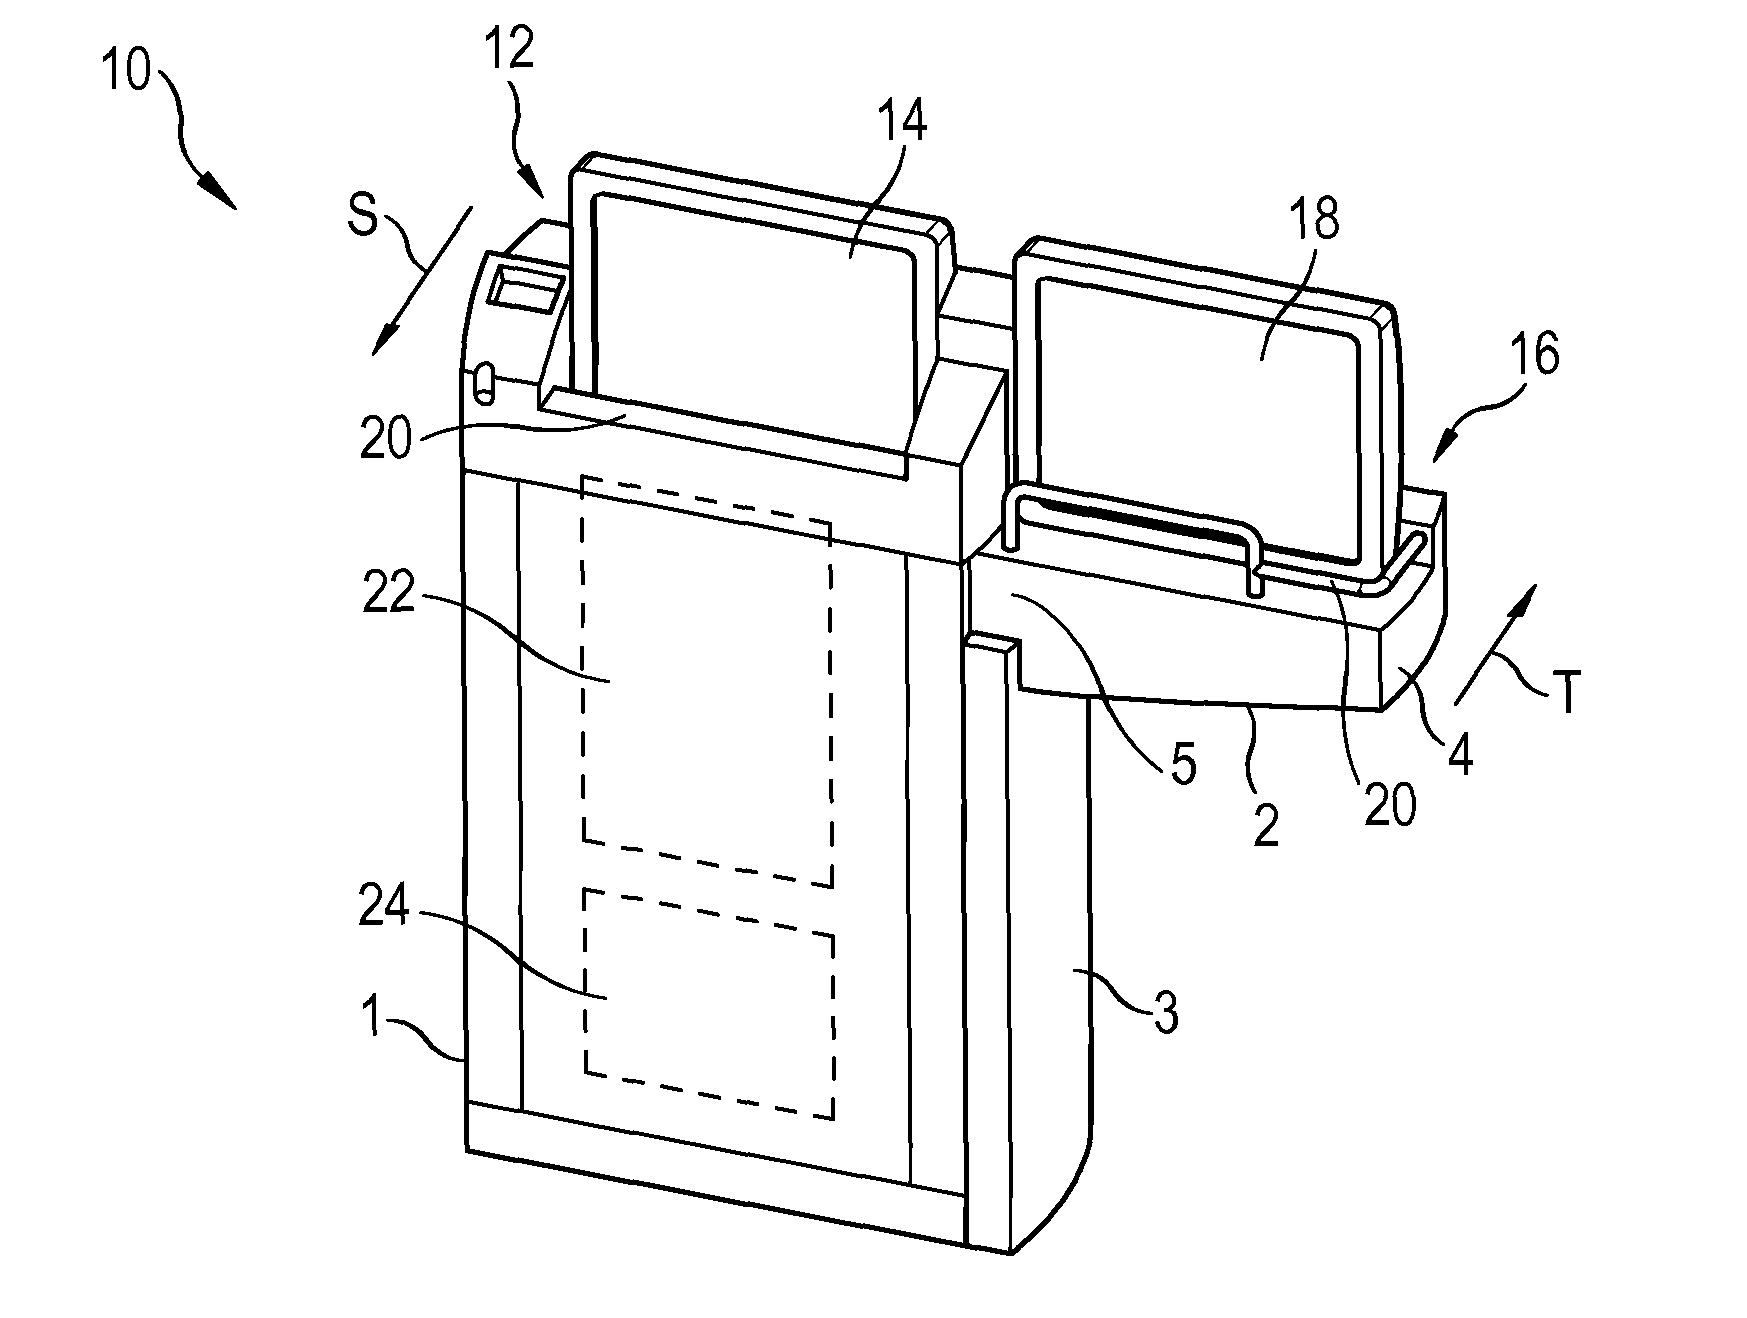 Apparatus for reading out X-ray information stored in storage phosphor plates